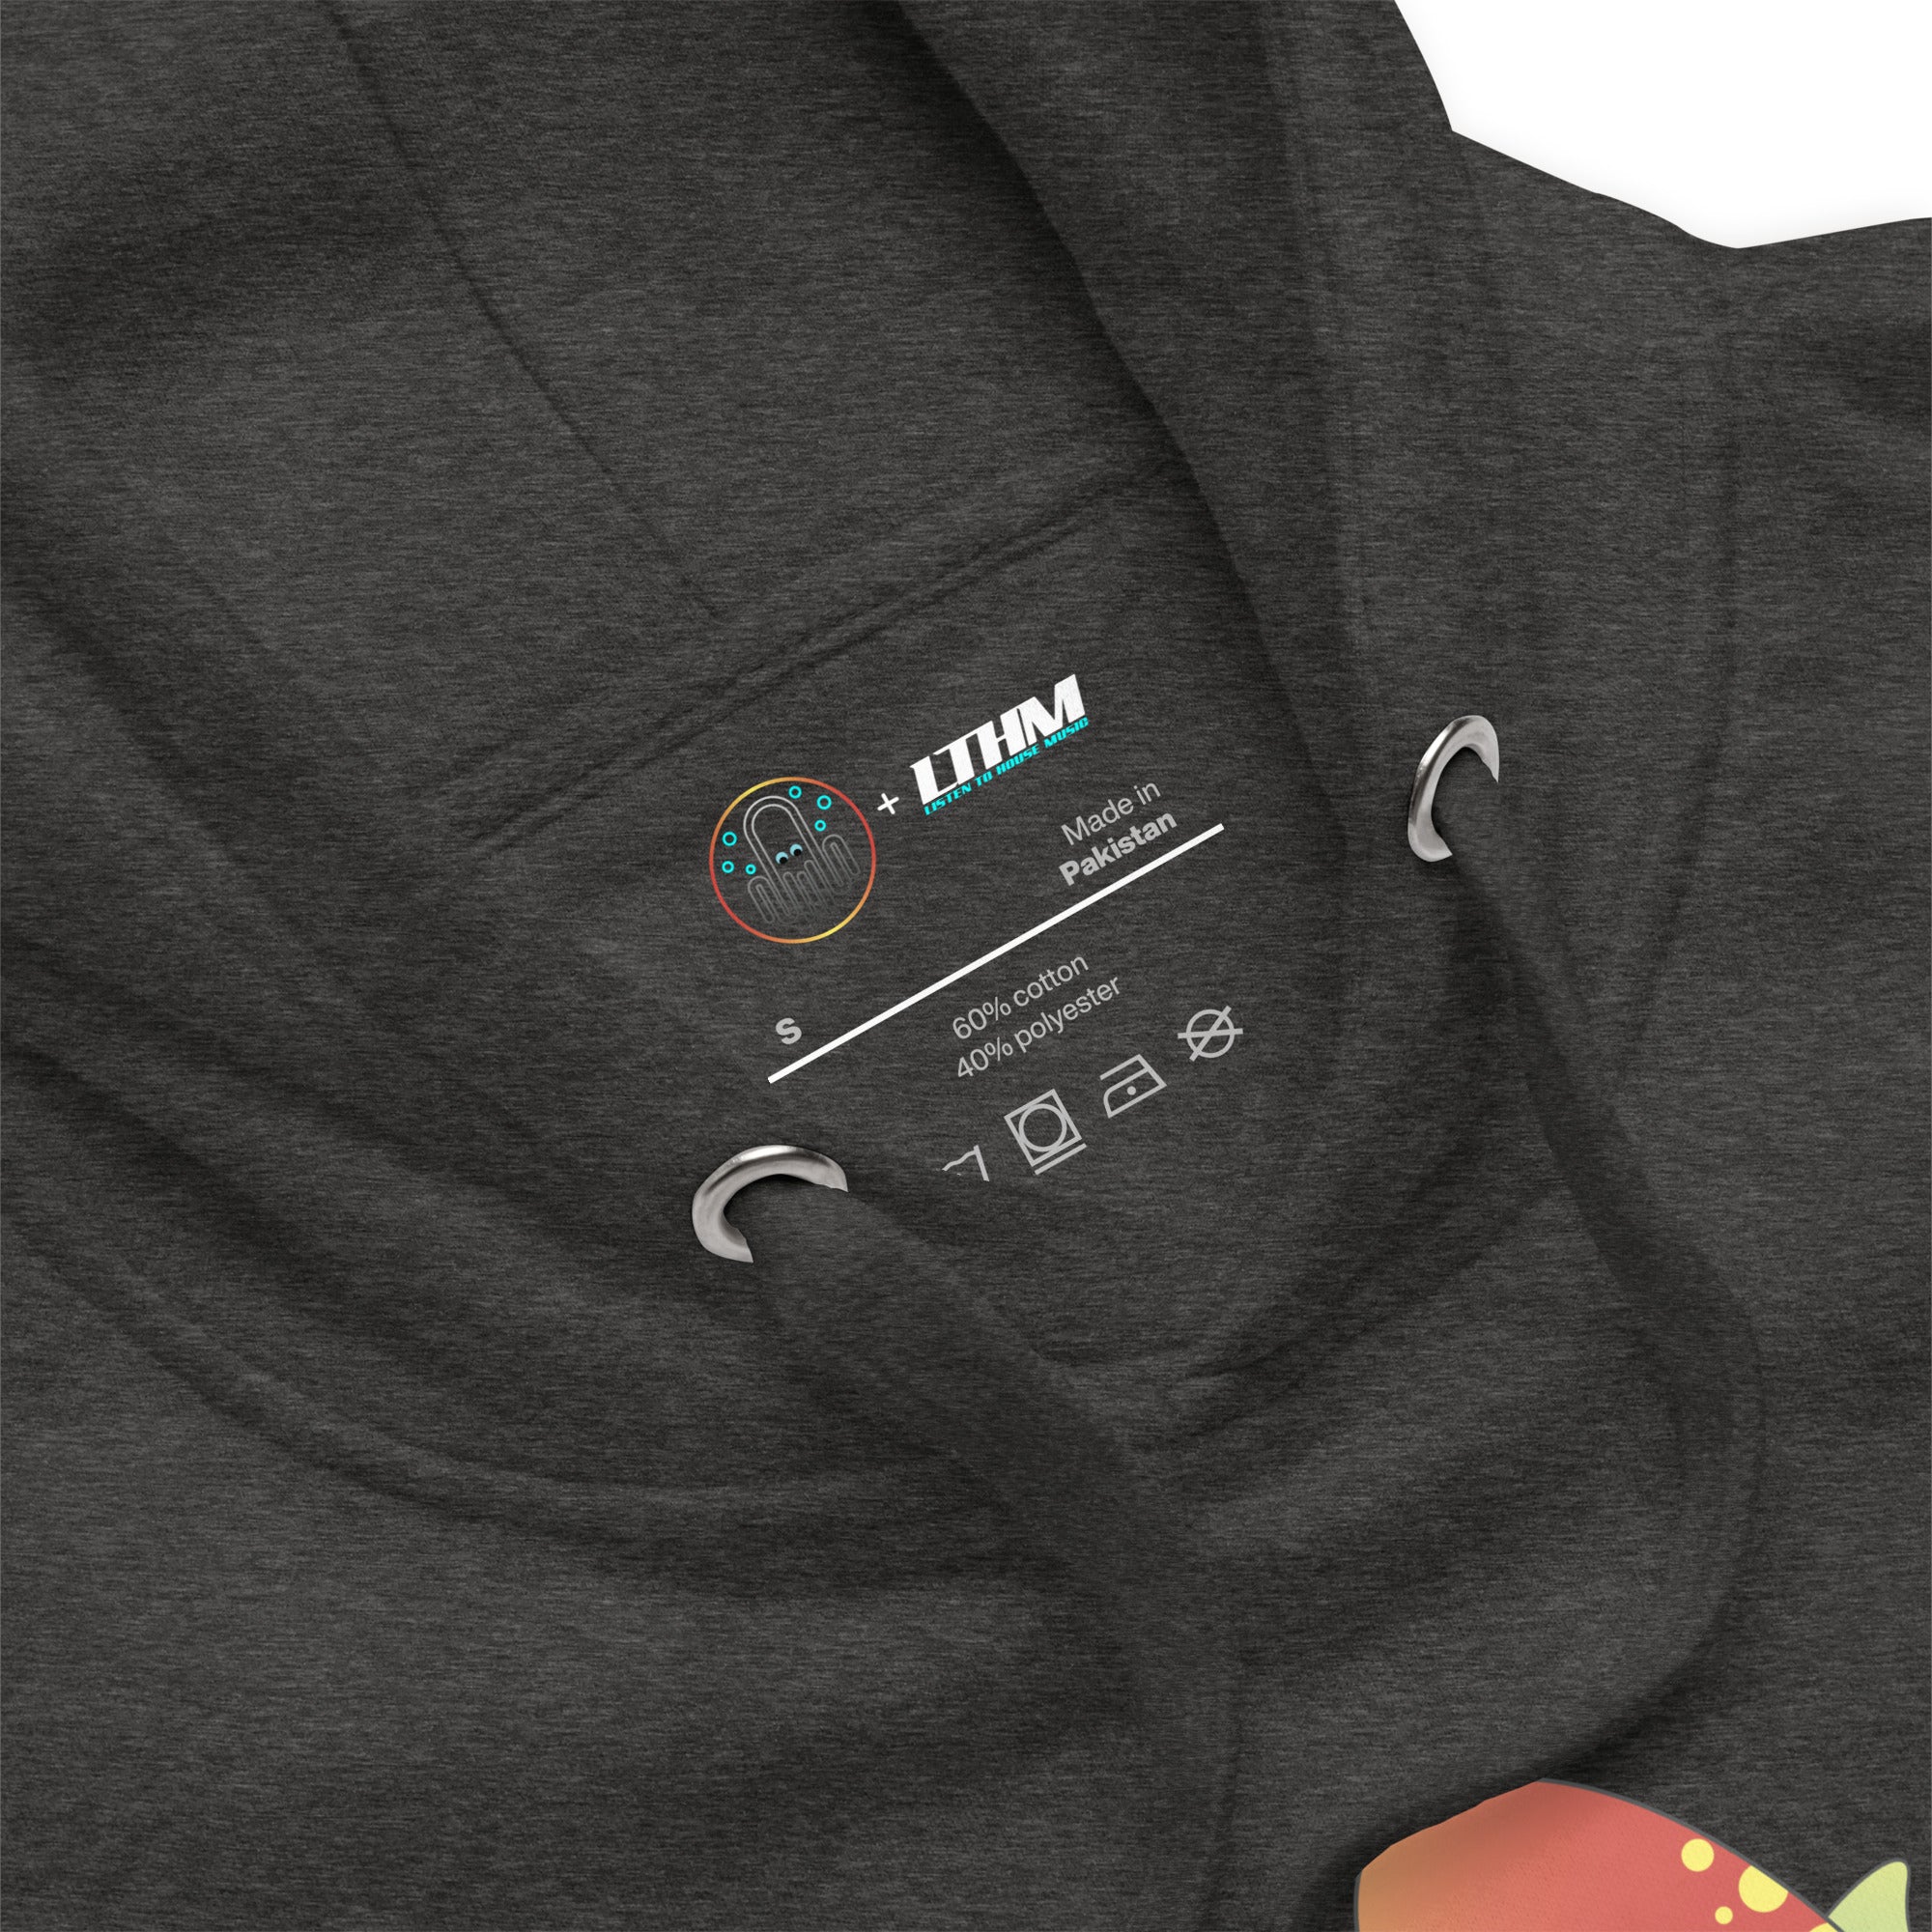 Charcoal Heather Tiny Robots Graphic Hoodie Zoomed View of Hood and Inside Label